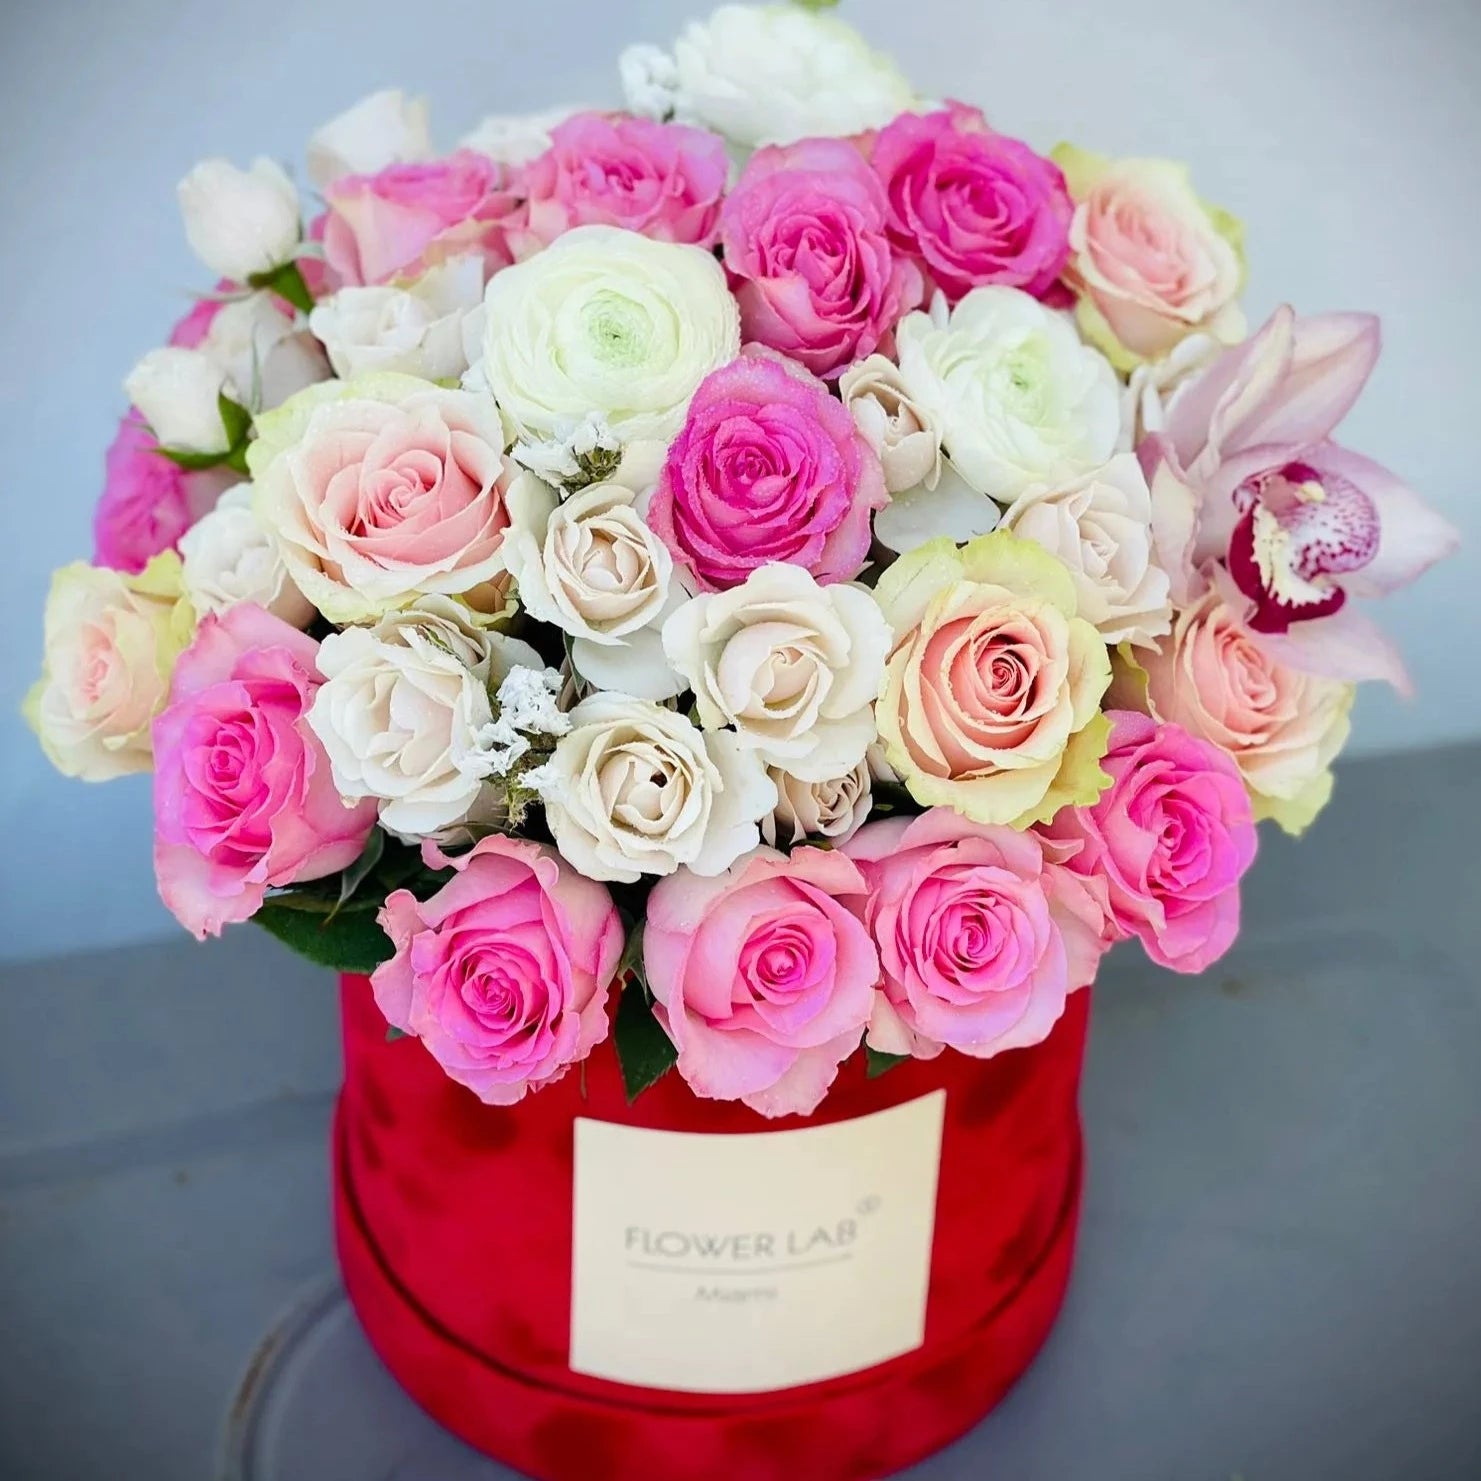 Romance Arrangement with Pink and White Roses